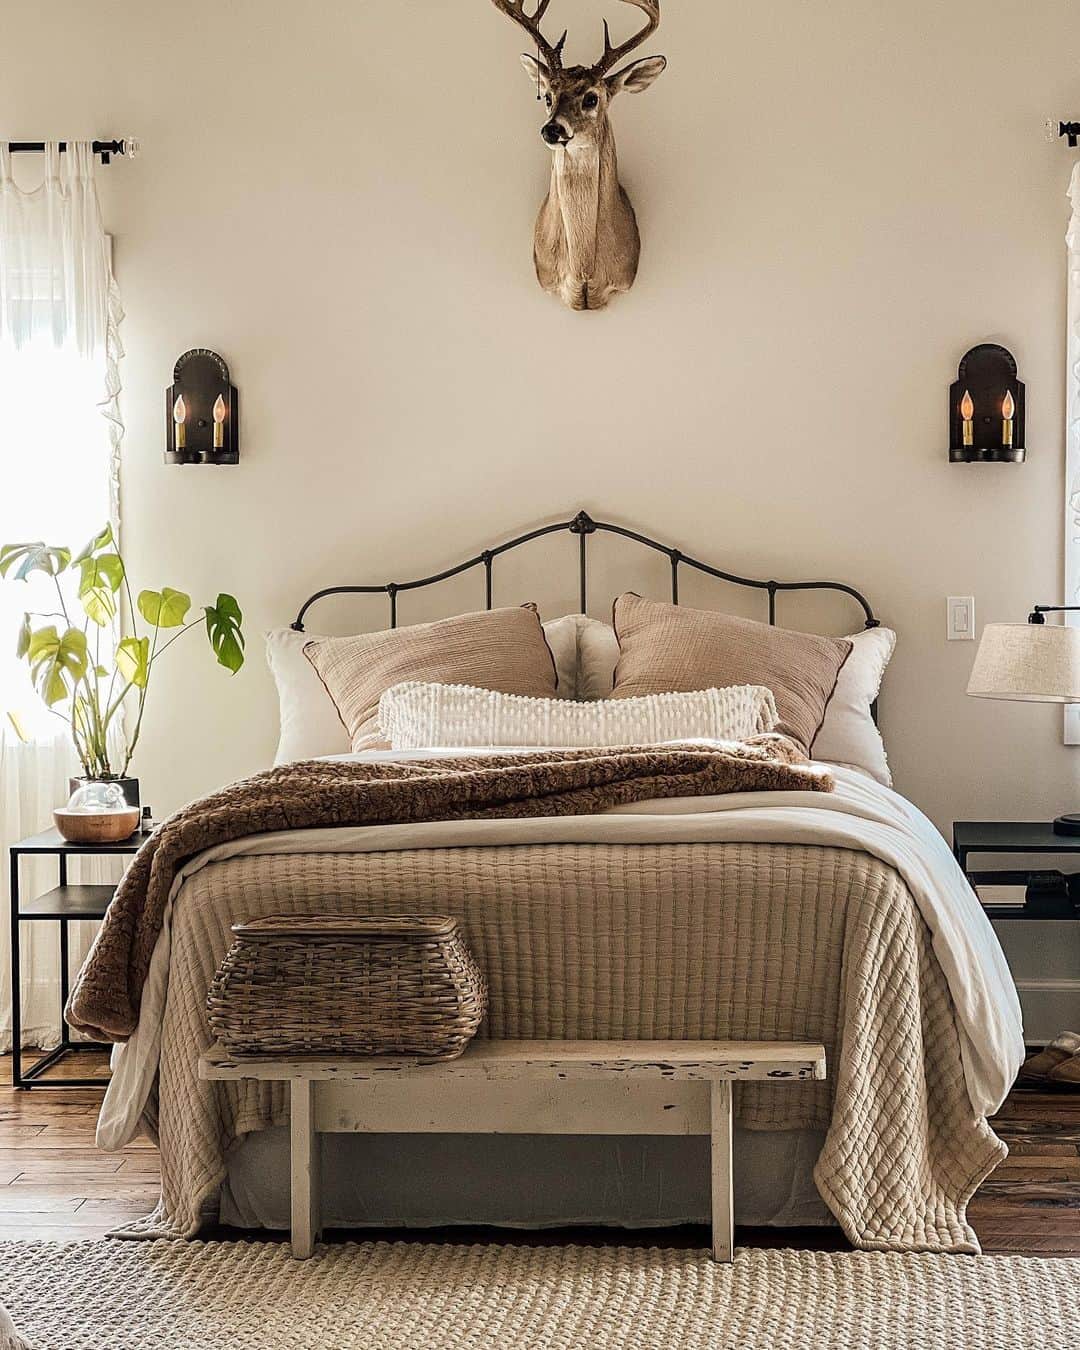 Country Bedroom with Rustic Accents